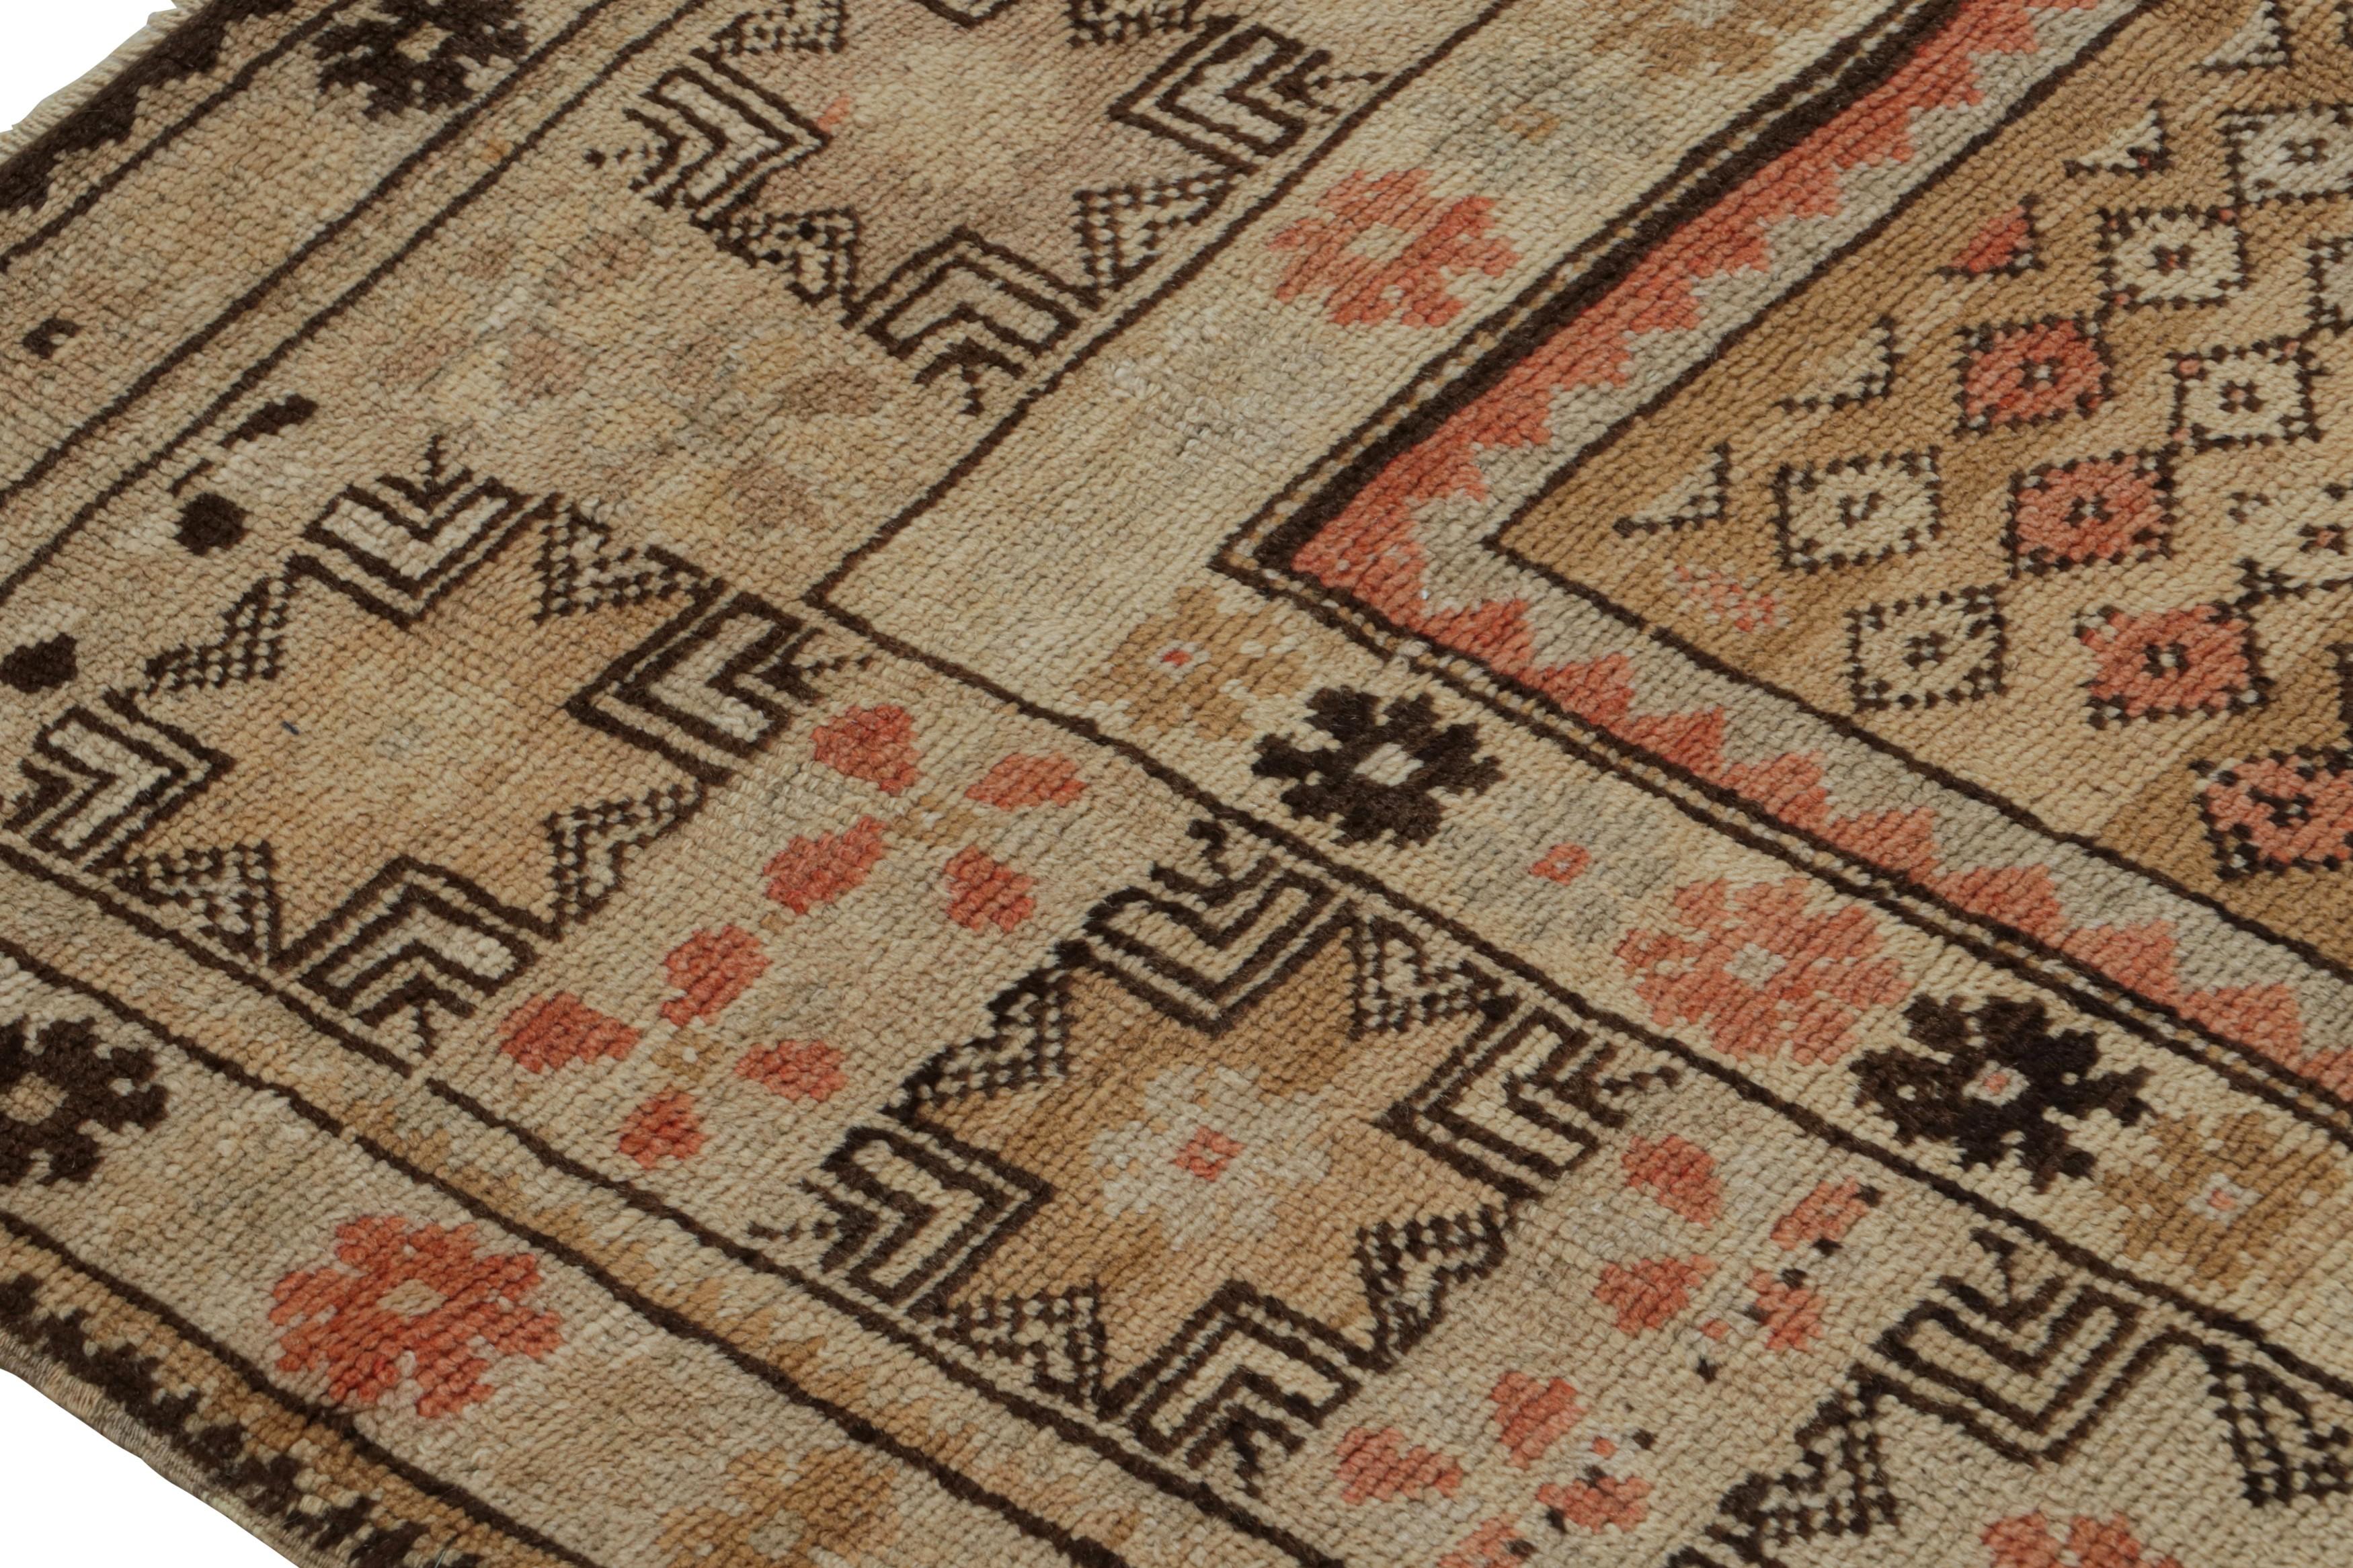 Antique Oushak rug in Beige-Brown Tribal Patterns by Rug & Kilim In Good Condition For Sale In Long Island City, NY